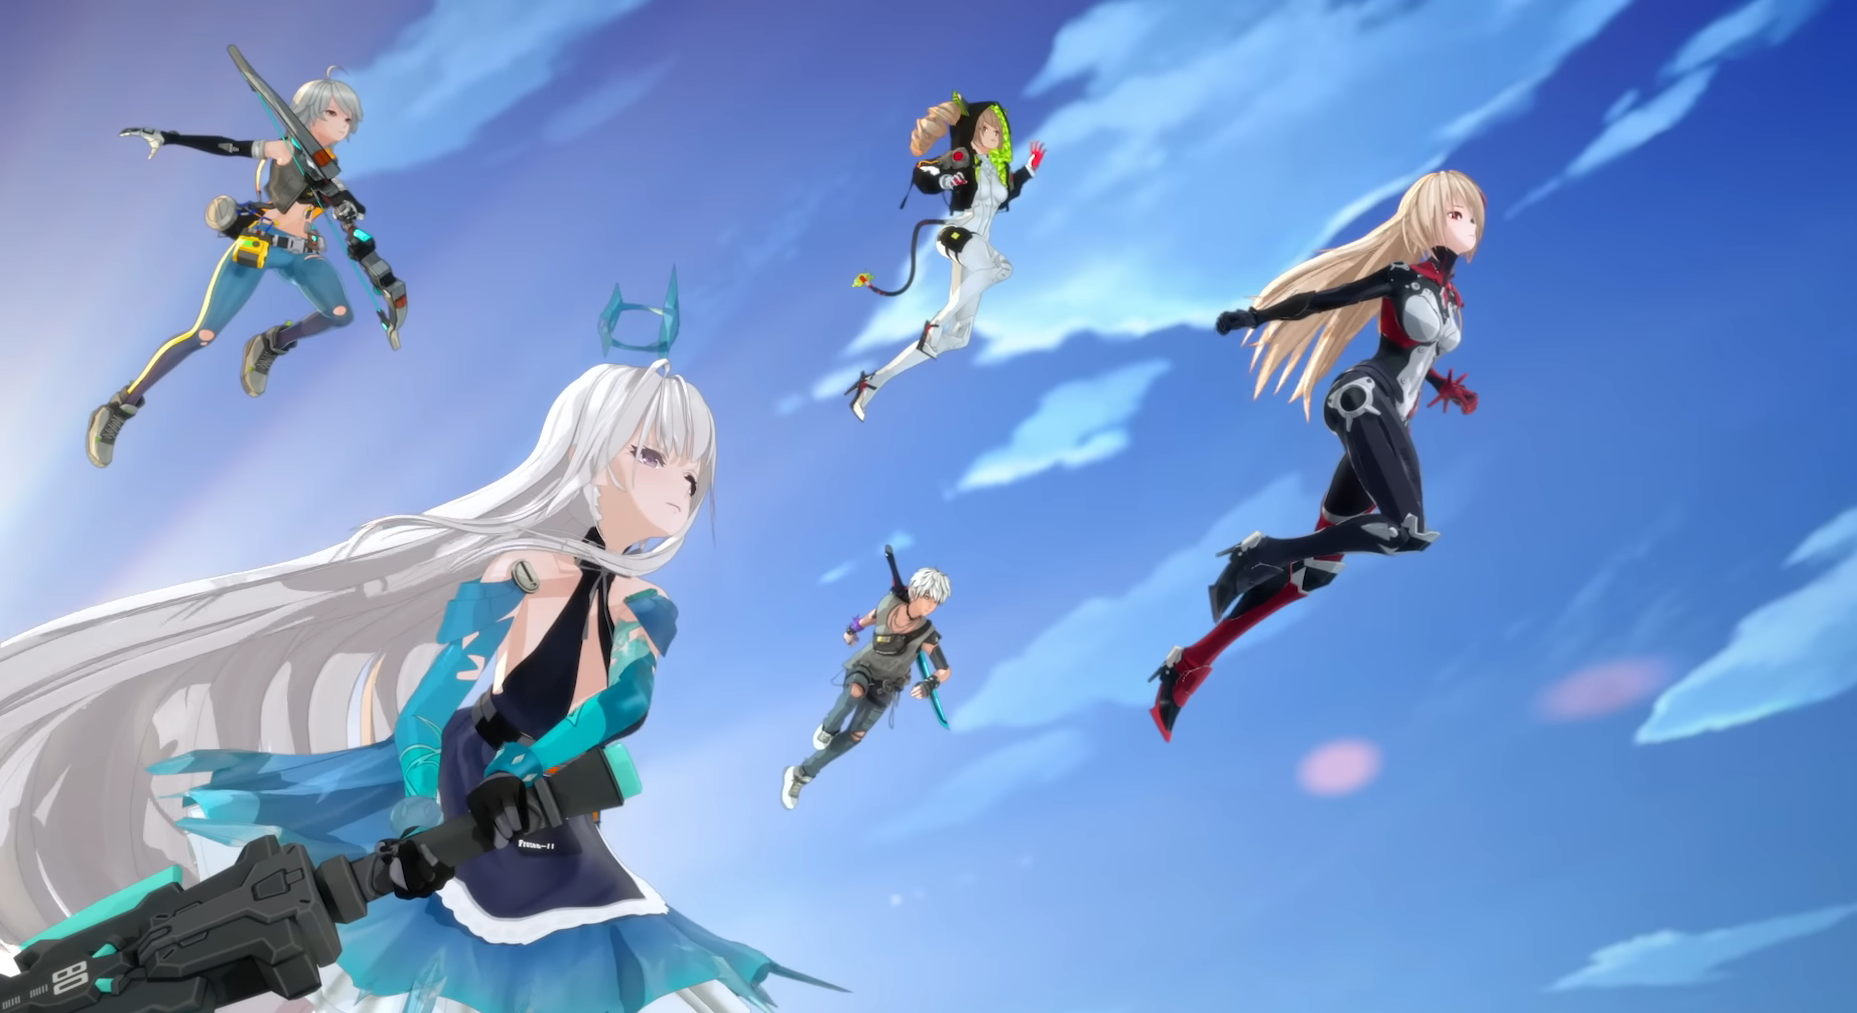 Anime MMO Tower Of Fantasy offers players free gifts after rocky launch |  Rock Paper Shotgun